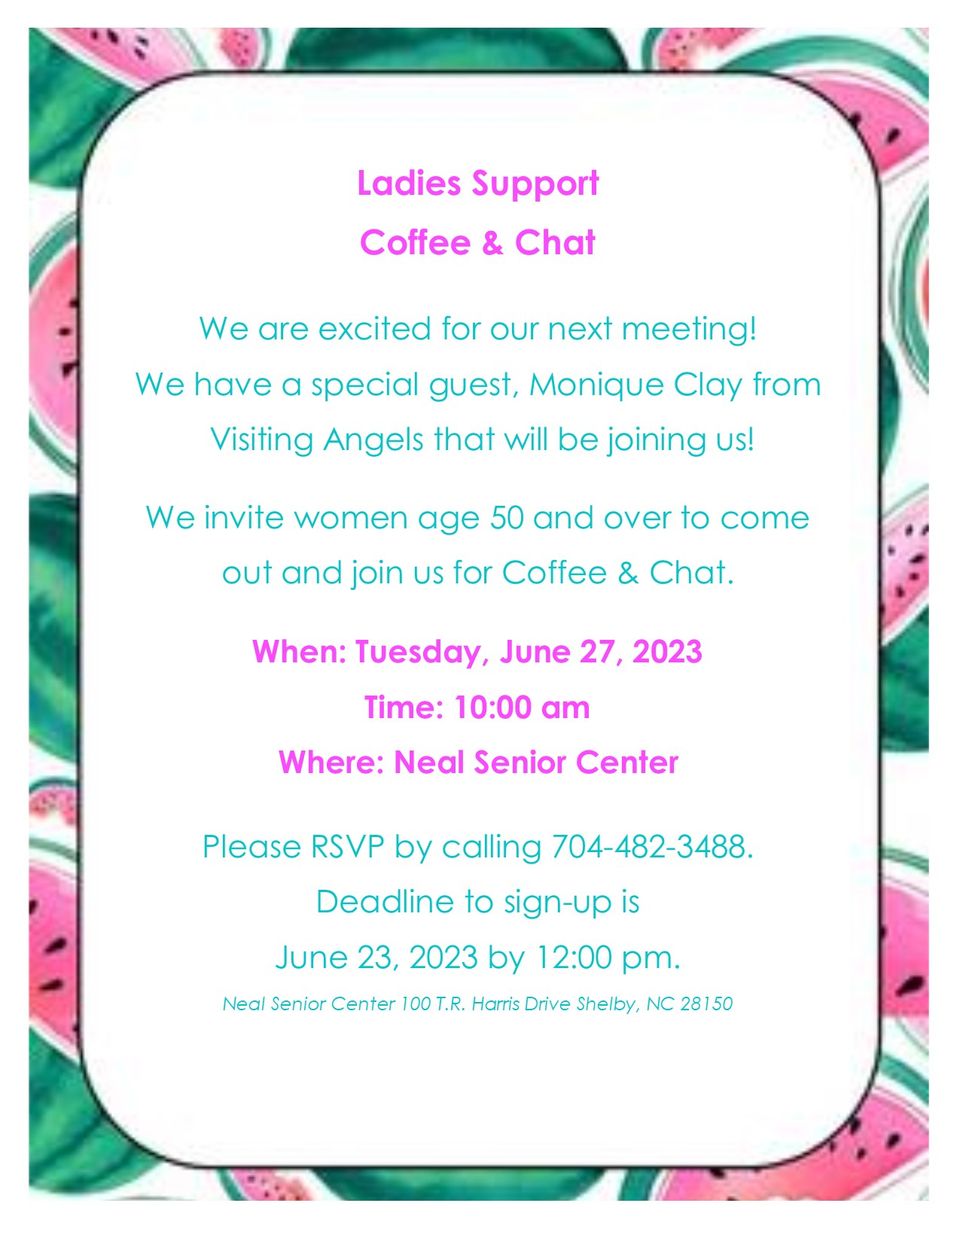 Ladies support coffee   chat june 27  2023